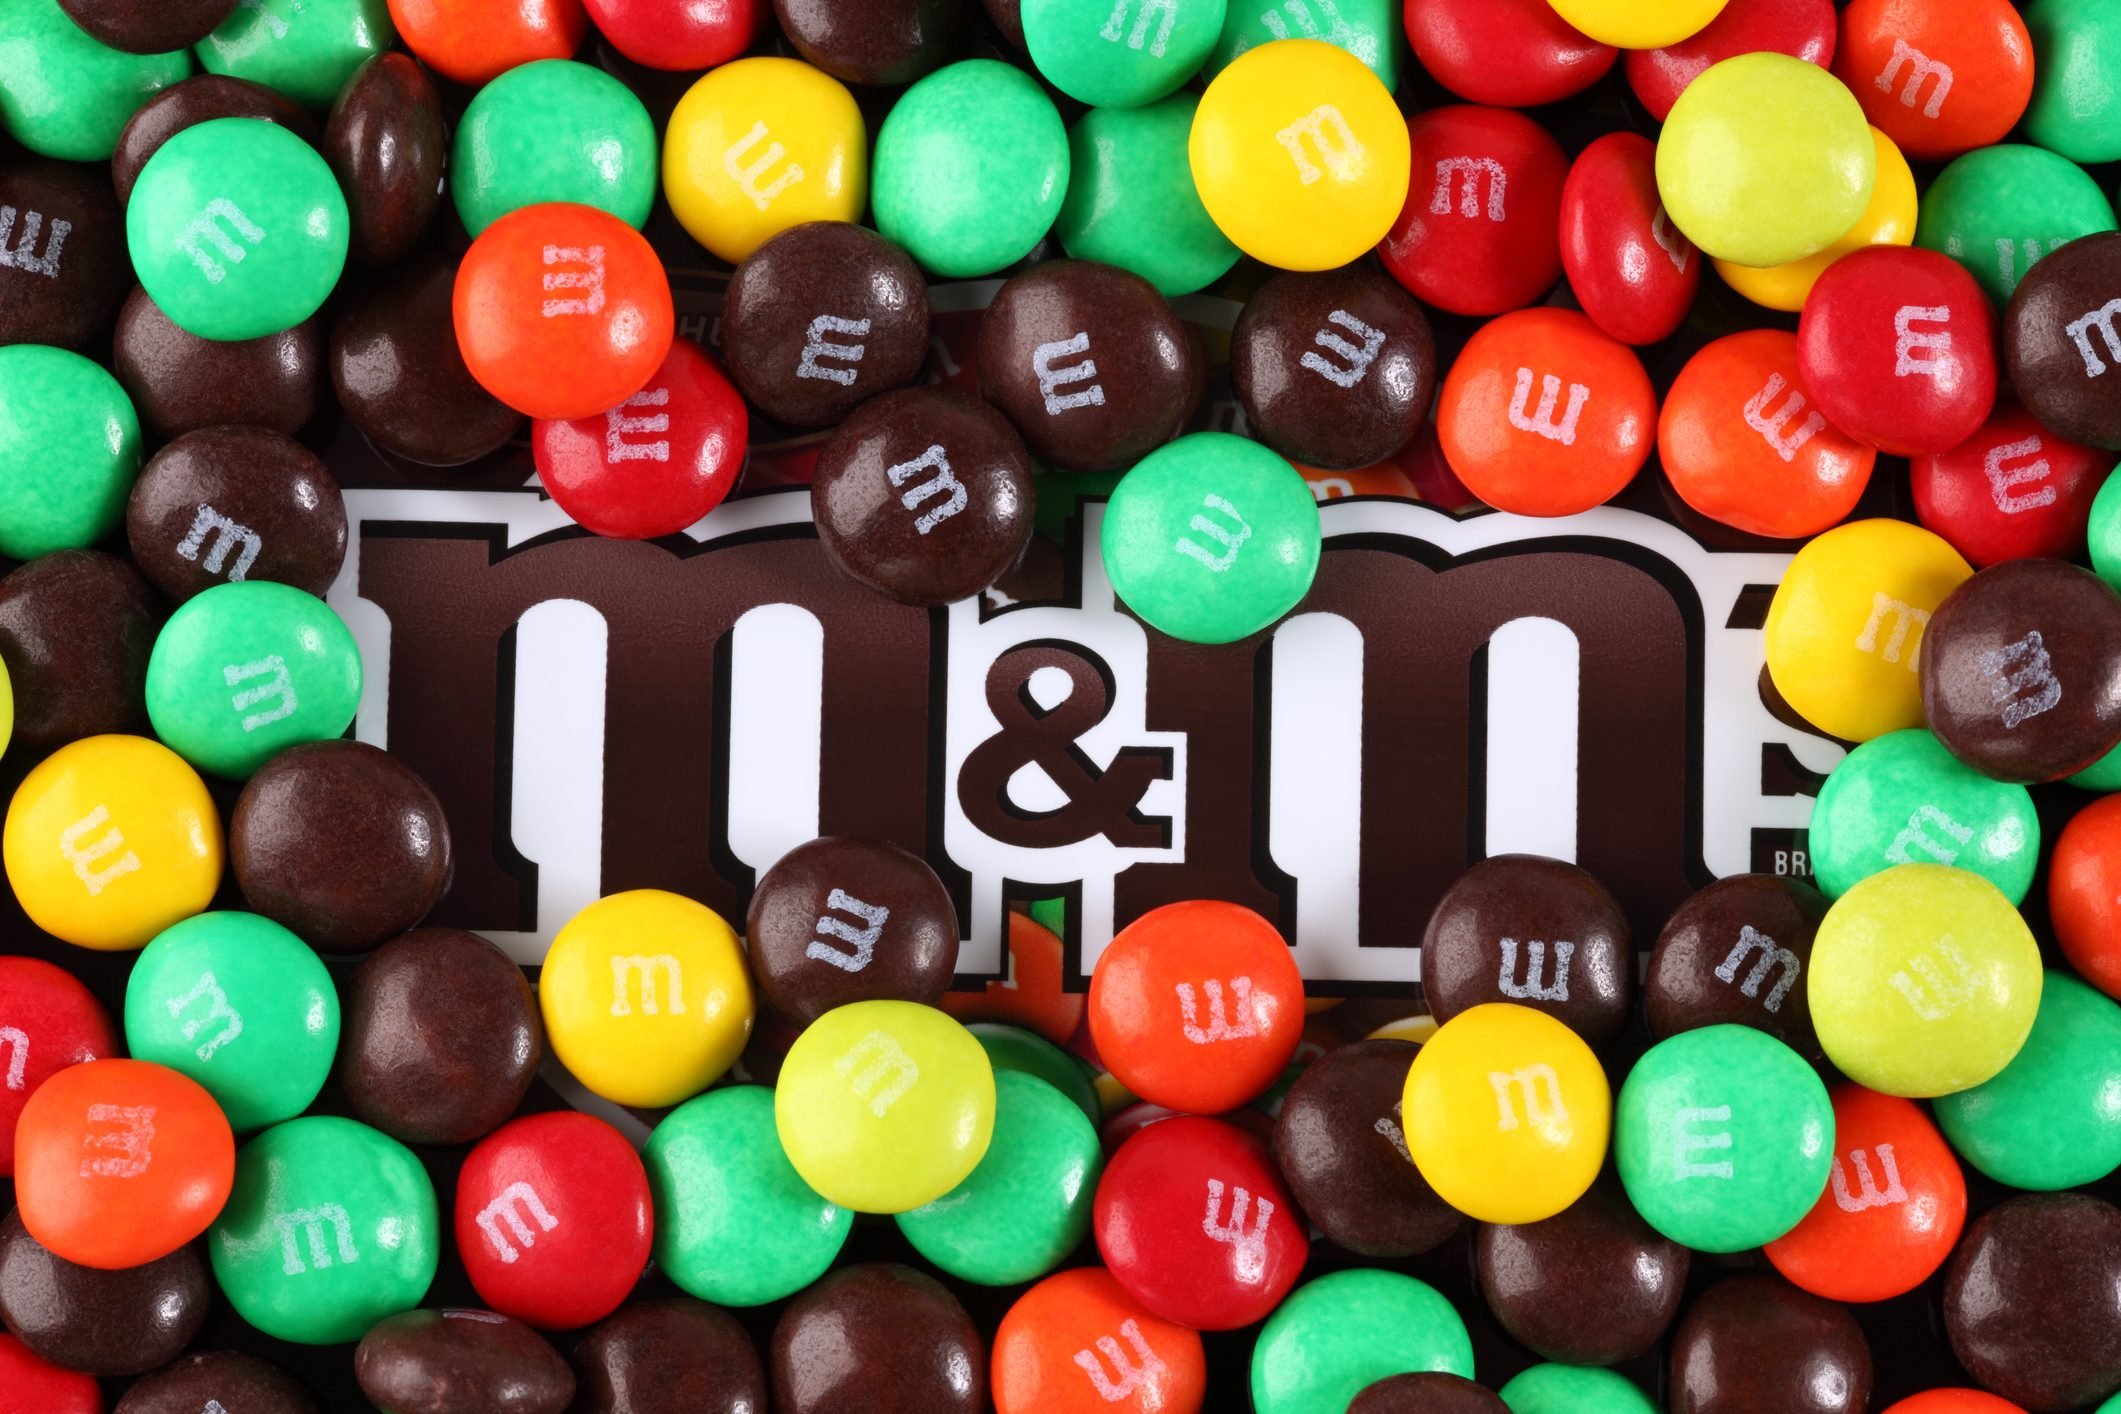 For some reason, the mini M&Ms are better than the regular sized ones.